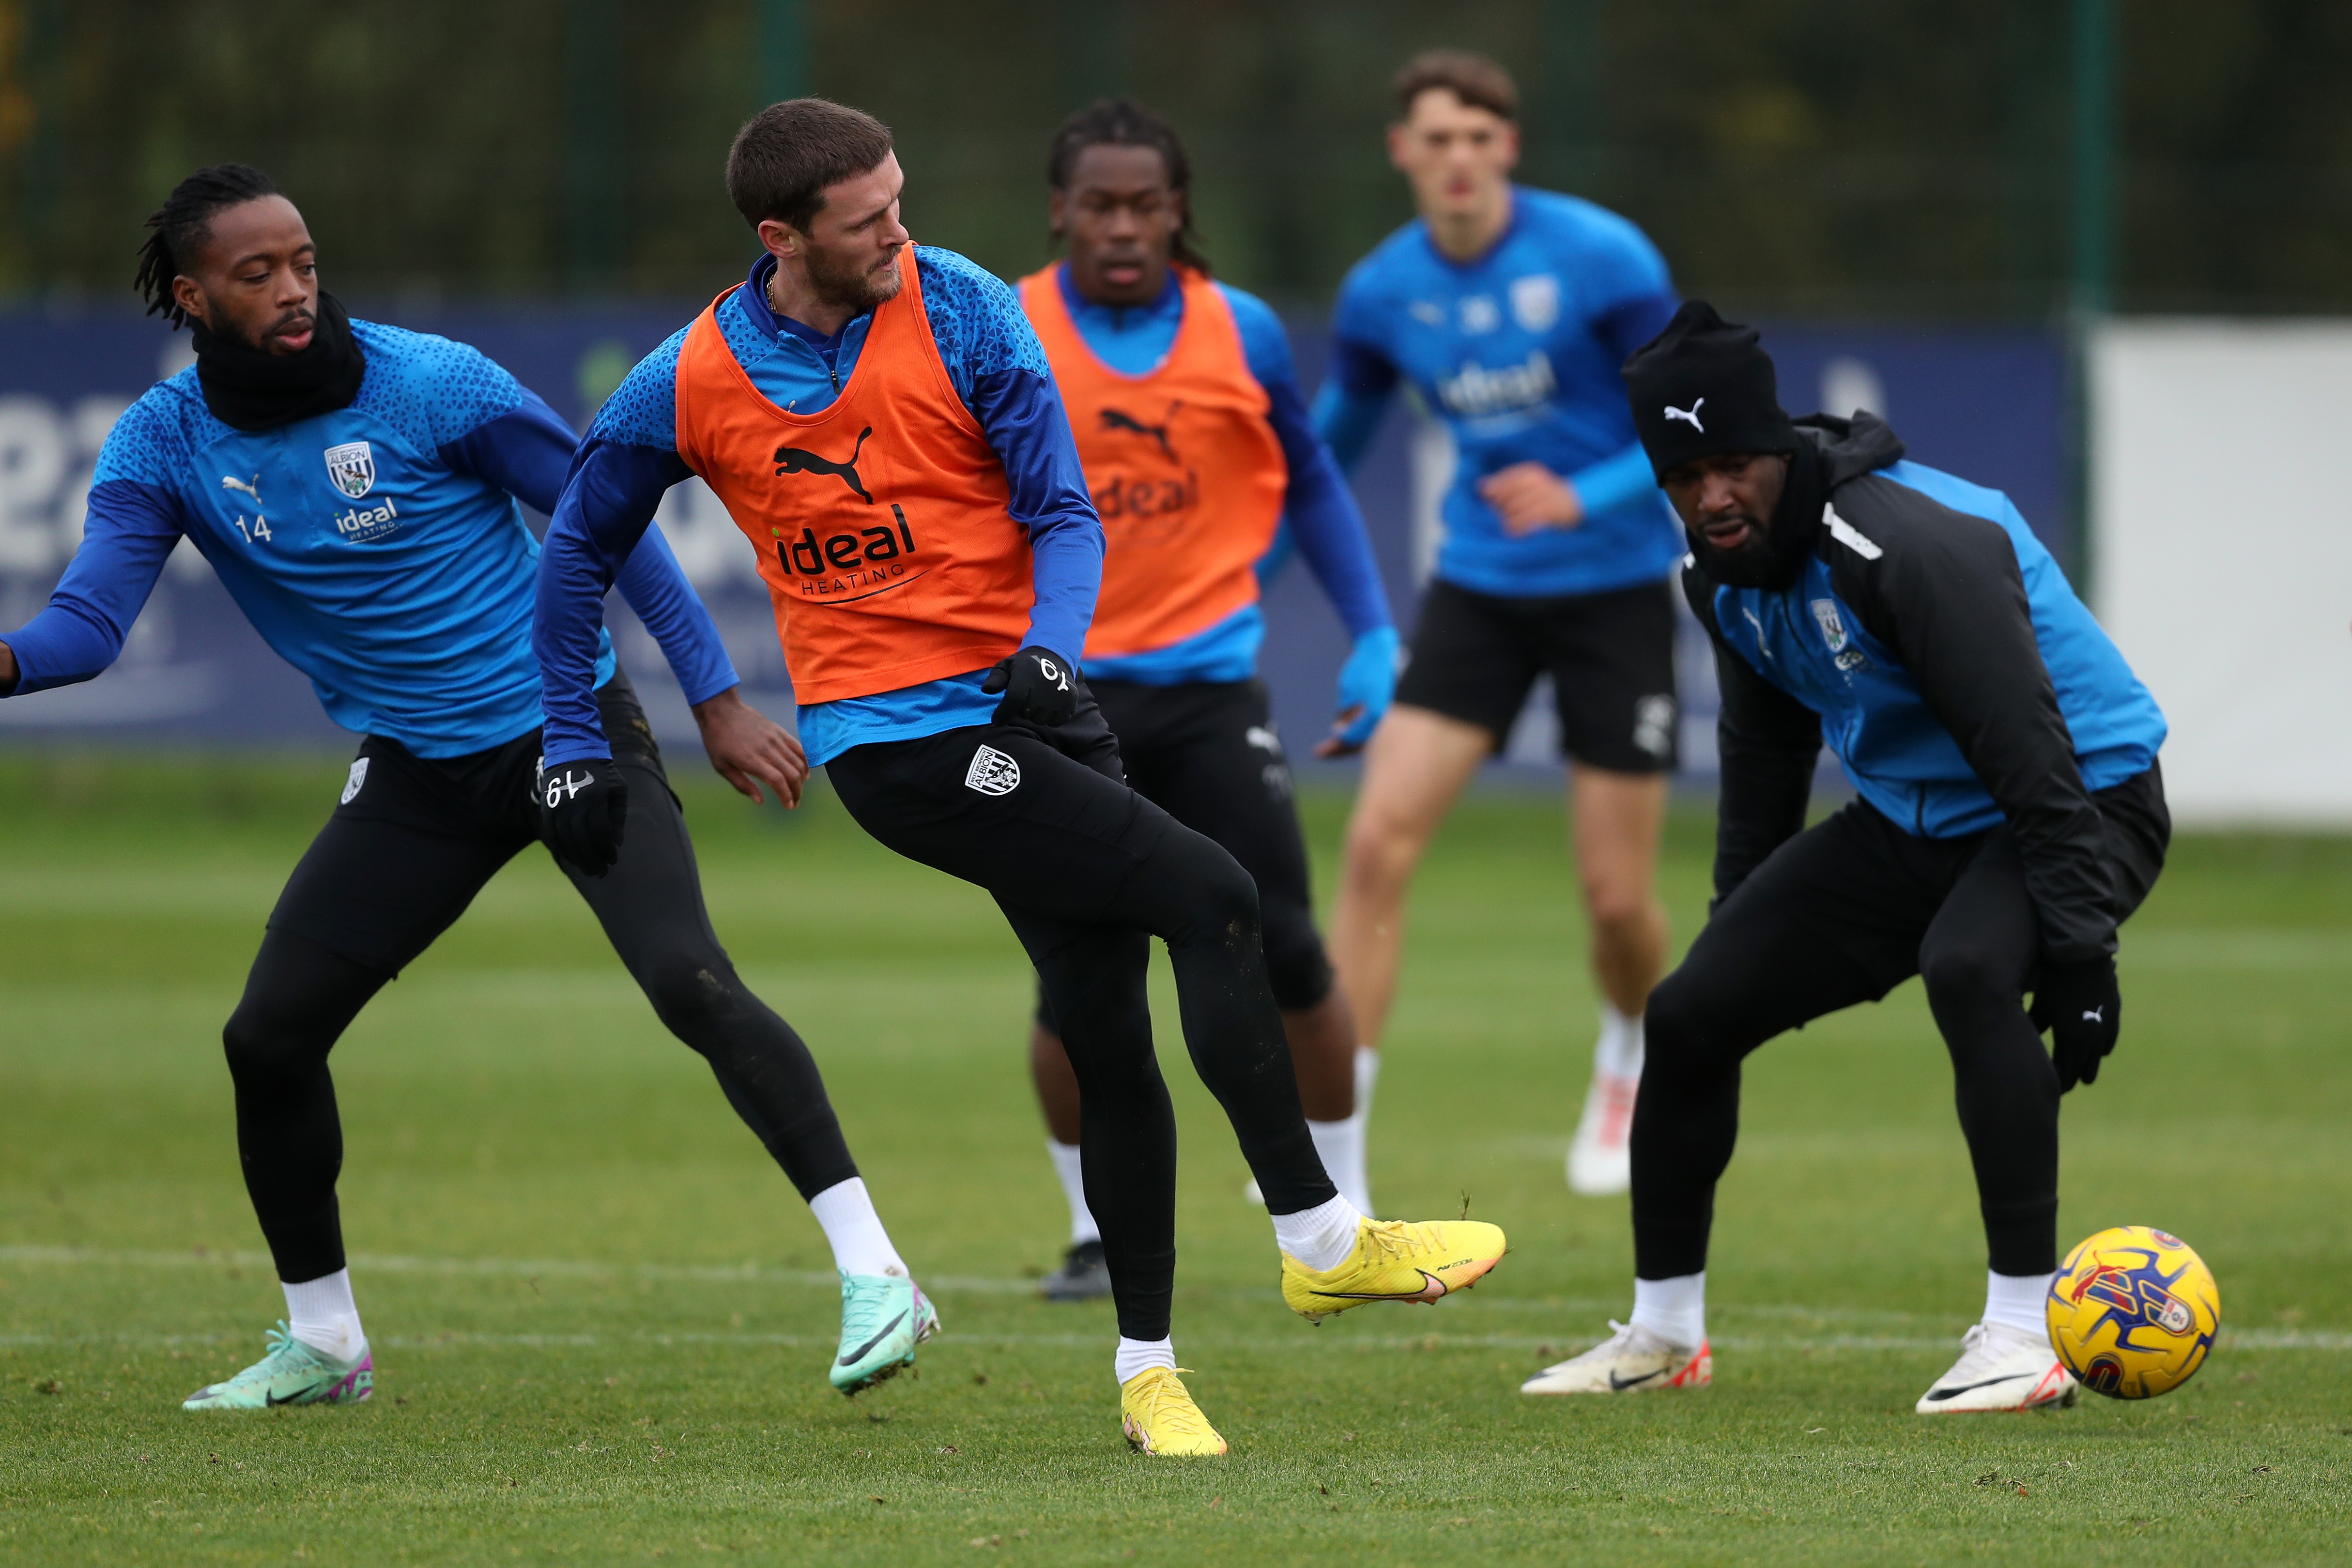 John Swift on the ball with Nathaniel Chalobah and Cedric Kipre close by